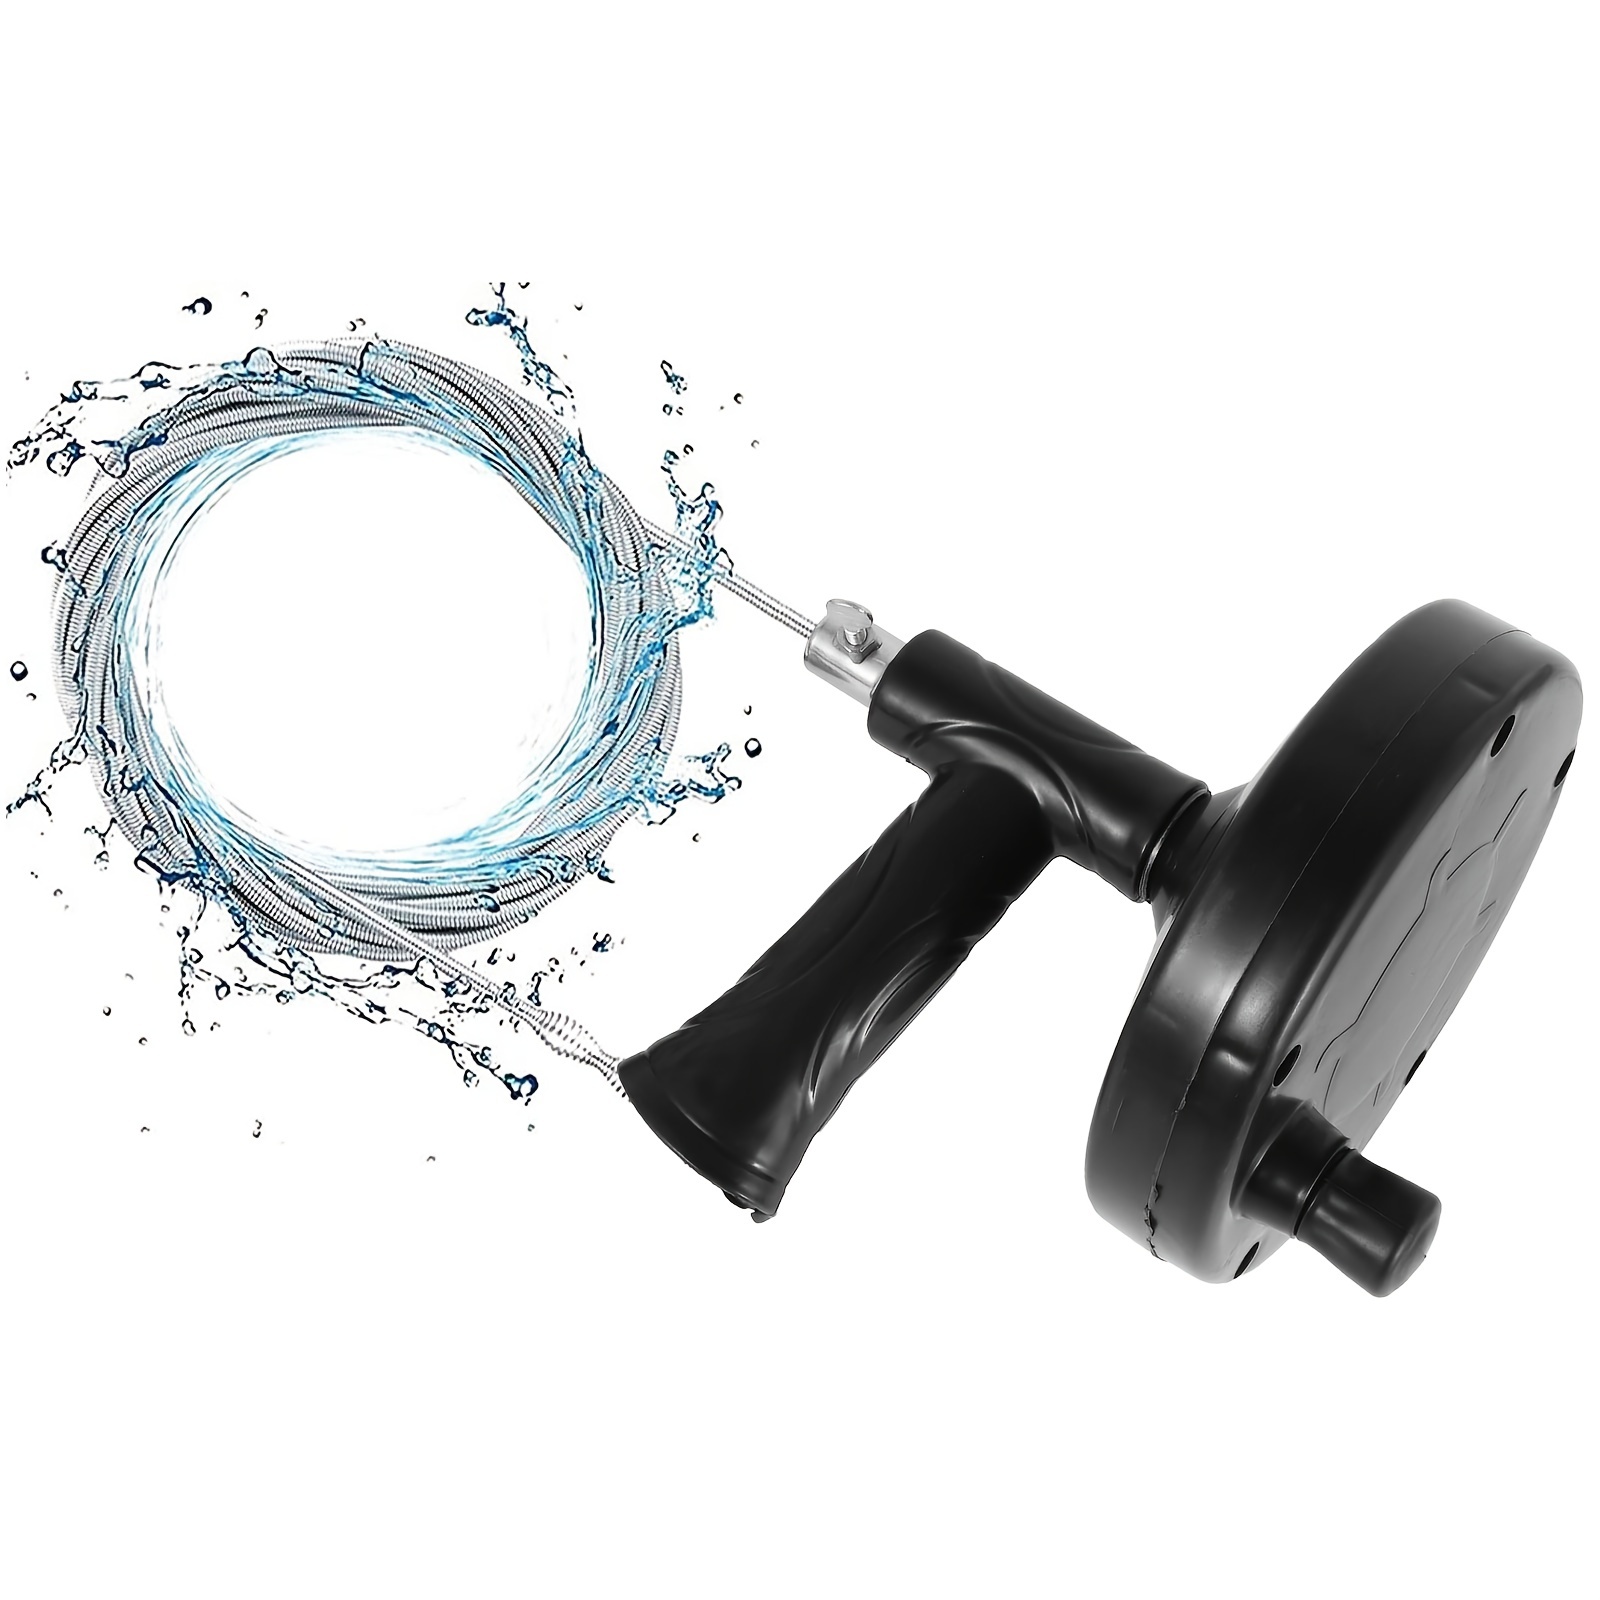 Plumbing Snake Drain Auger Manual Snake Drain Clog Remover with Non-slip  Handle for Bathroom Kitchen Bathtub Shower Sink